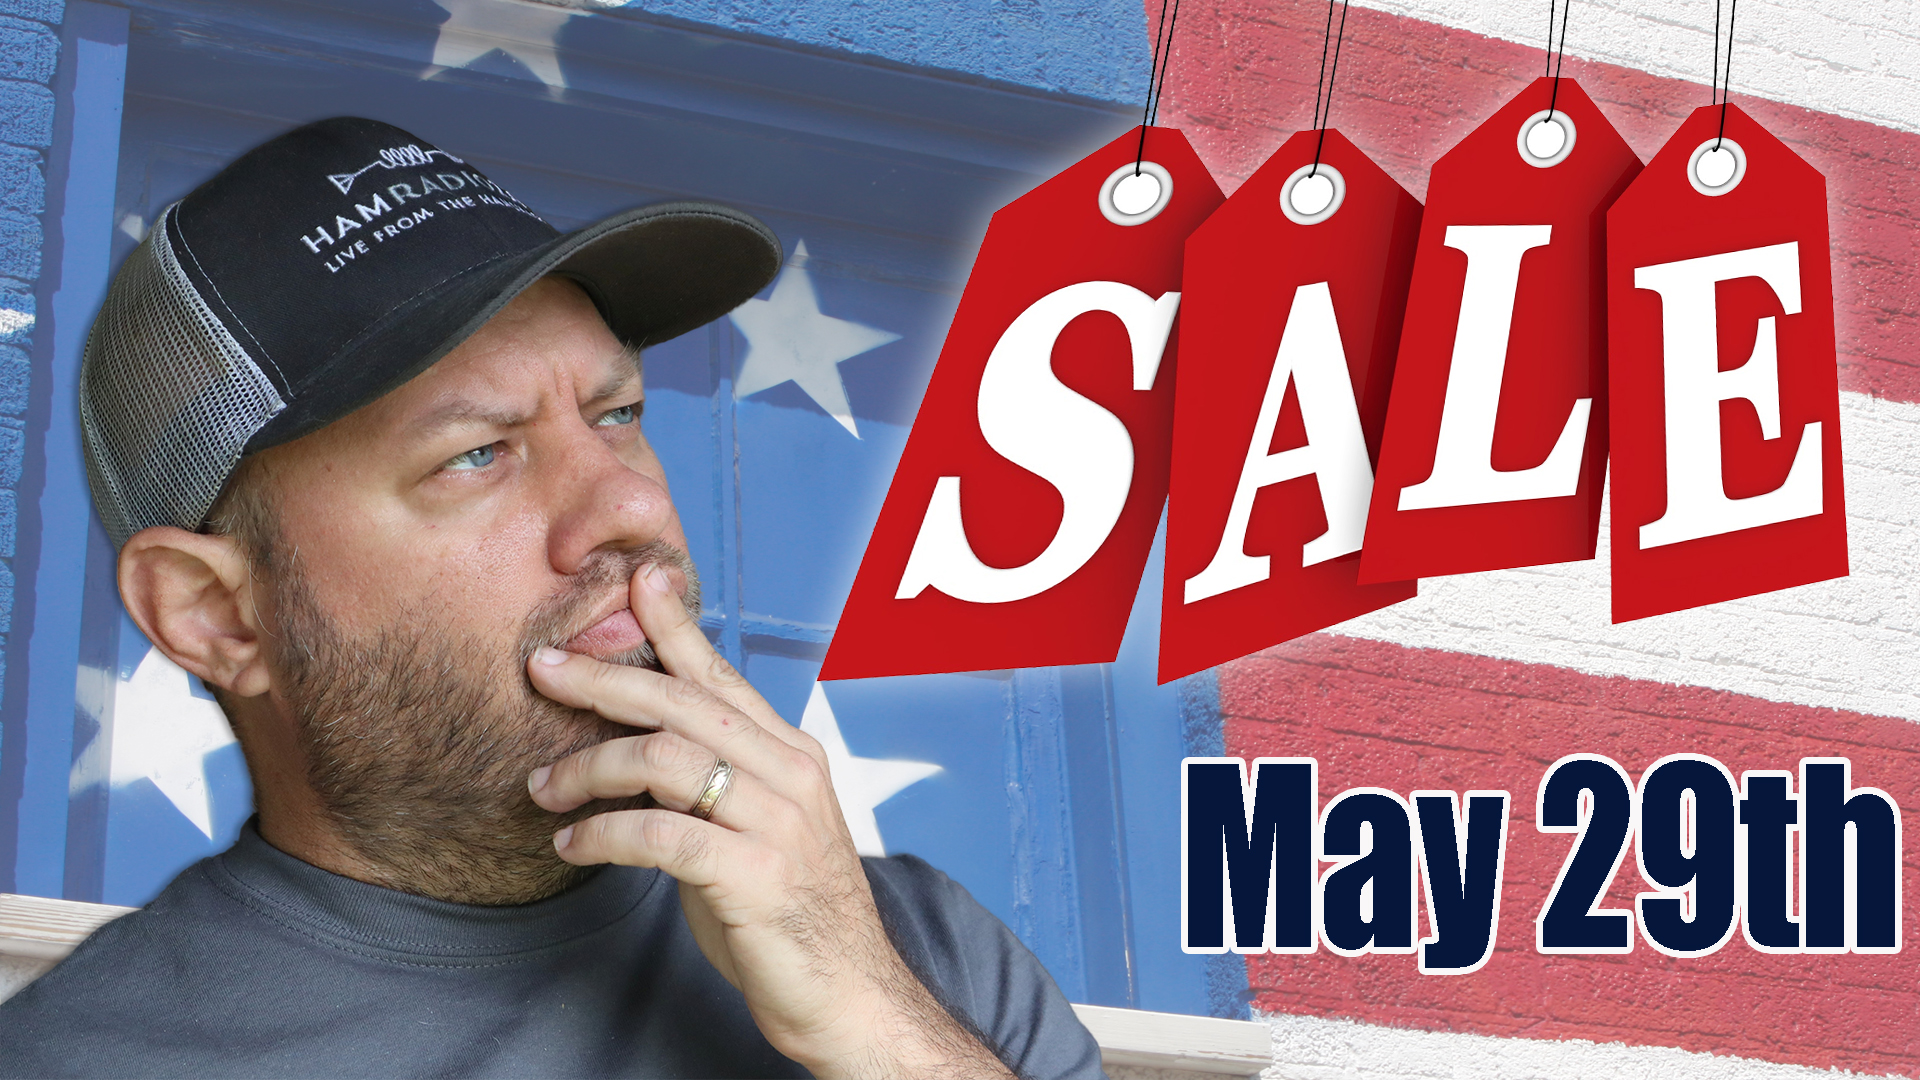 Episode 386: Ham Radio Shopping Deals for May 29th | Father’s Day and Field Day Preparation!